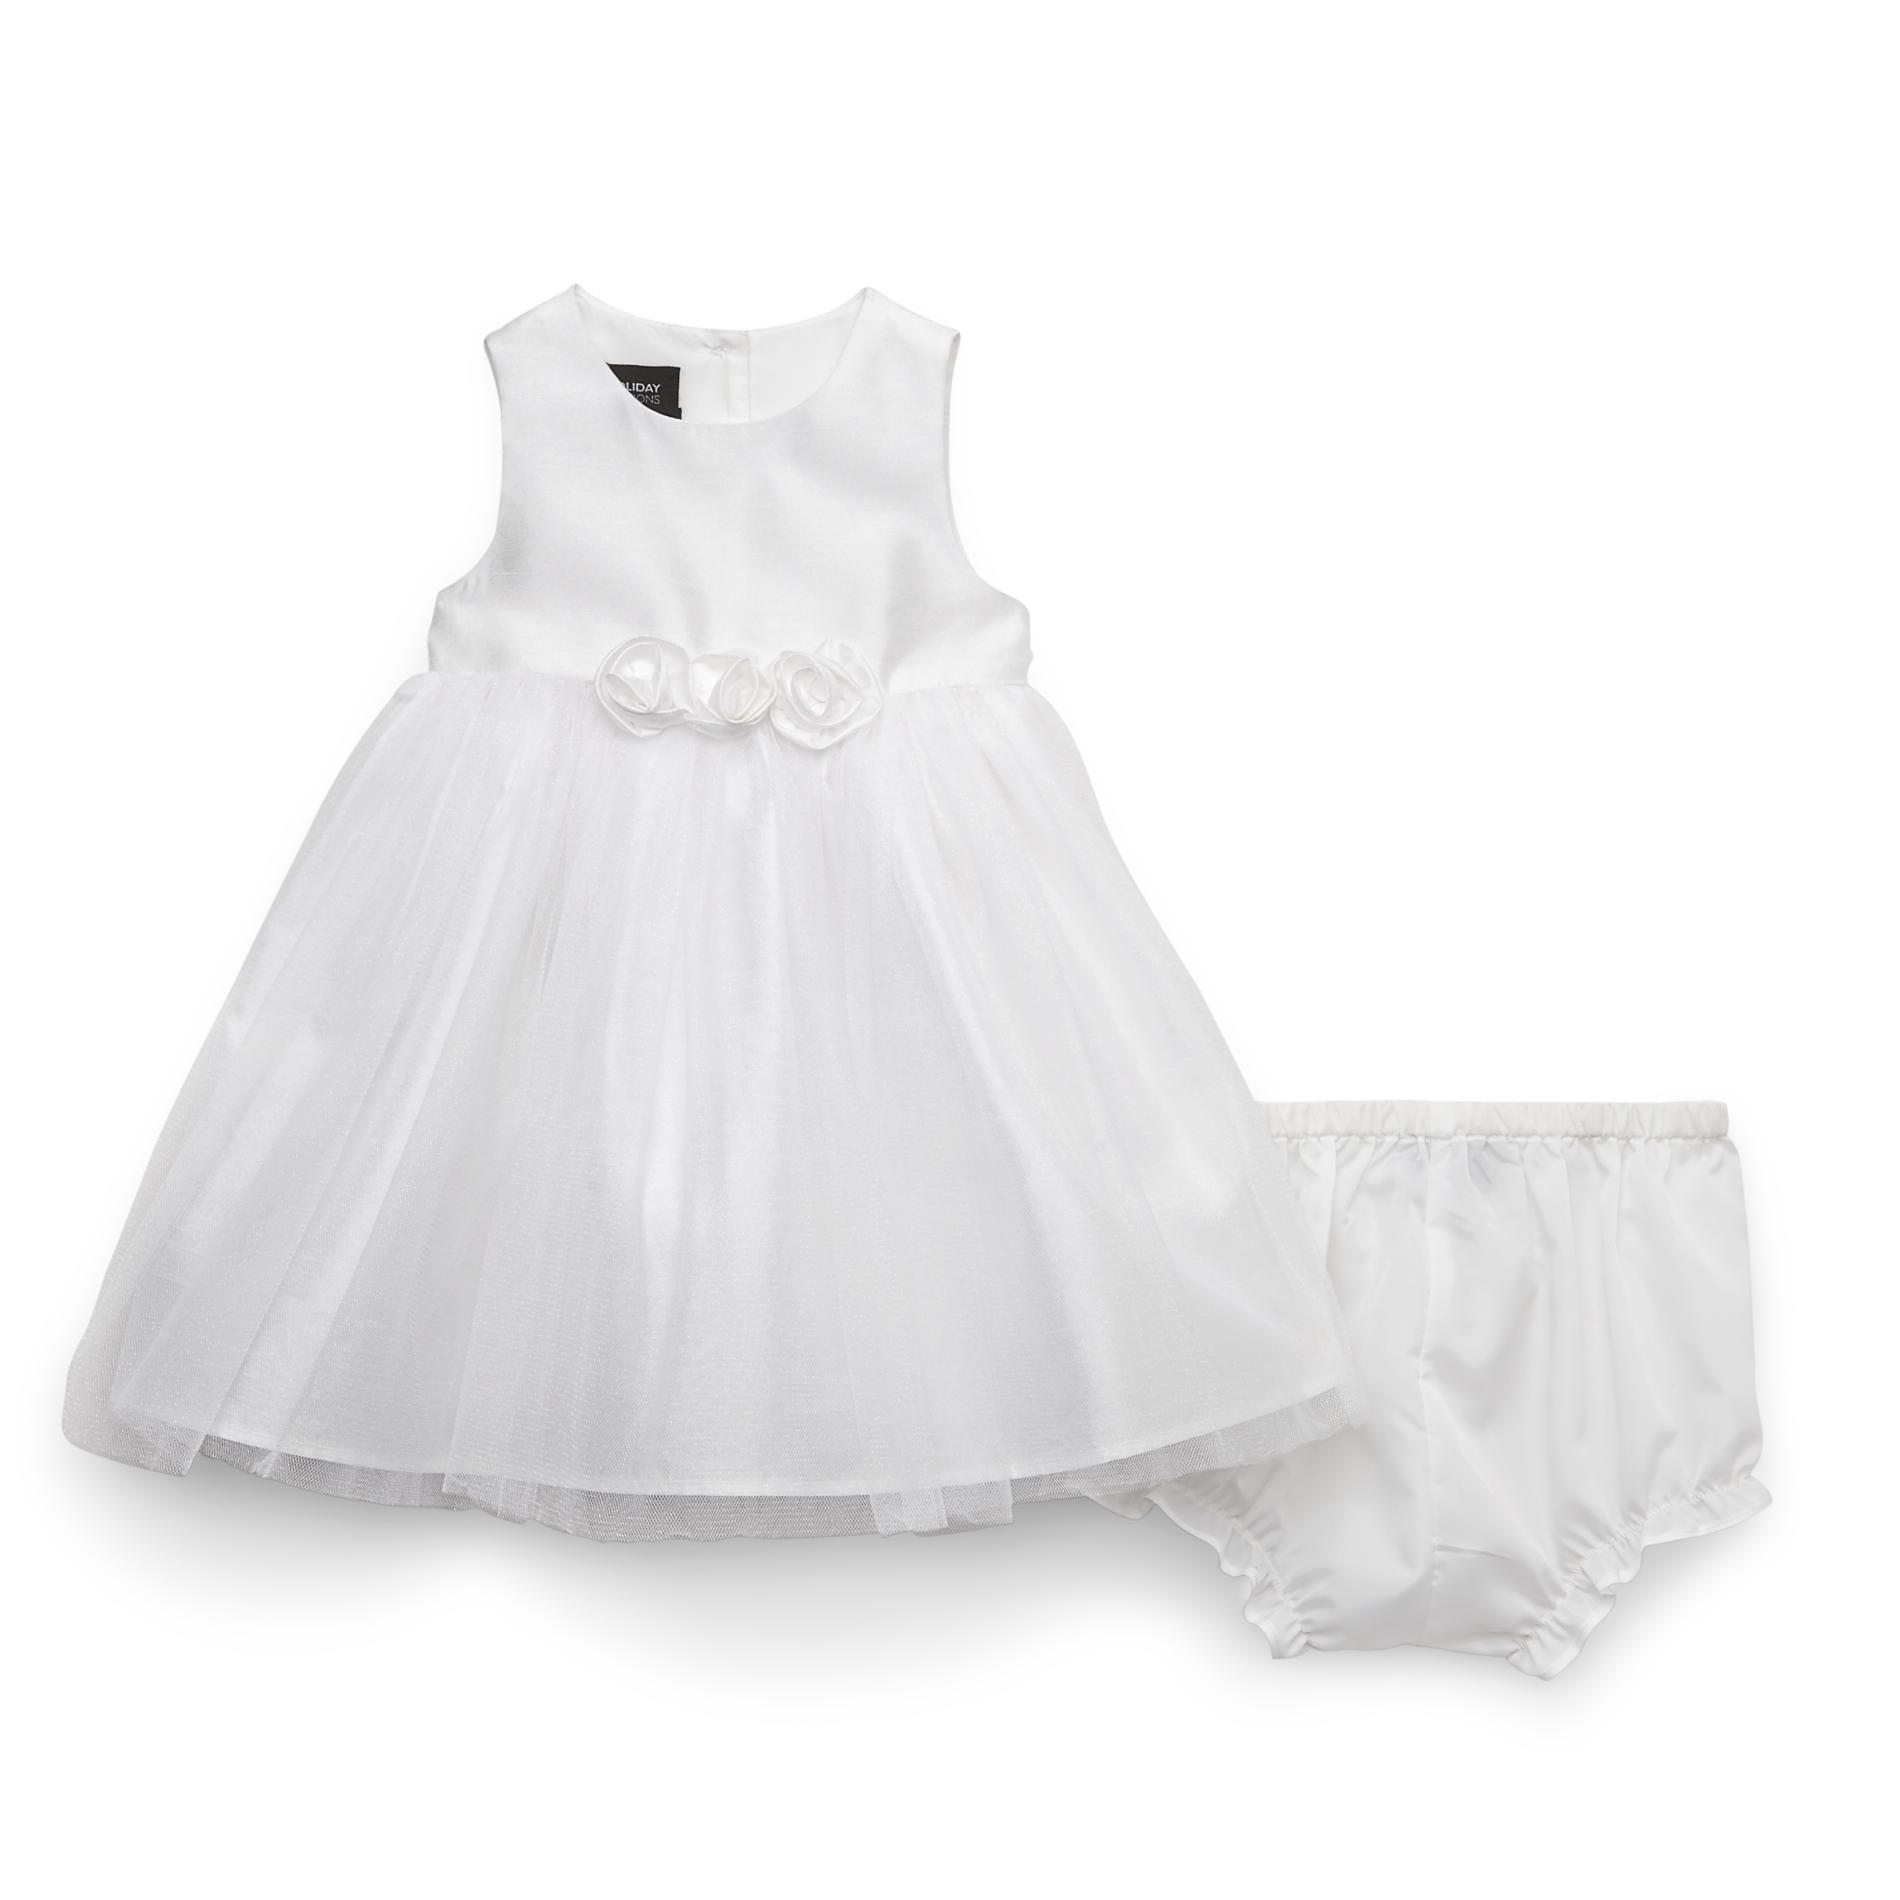 Holiday Editions Newborn Girl's Party Dress & Diaper Cover - Rose Appliques